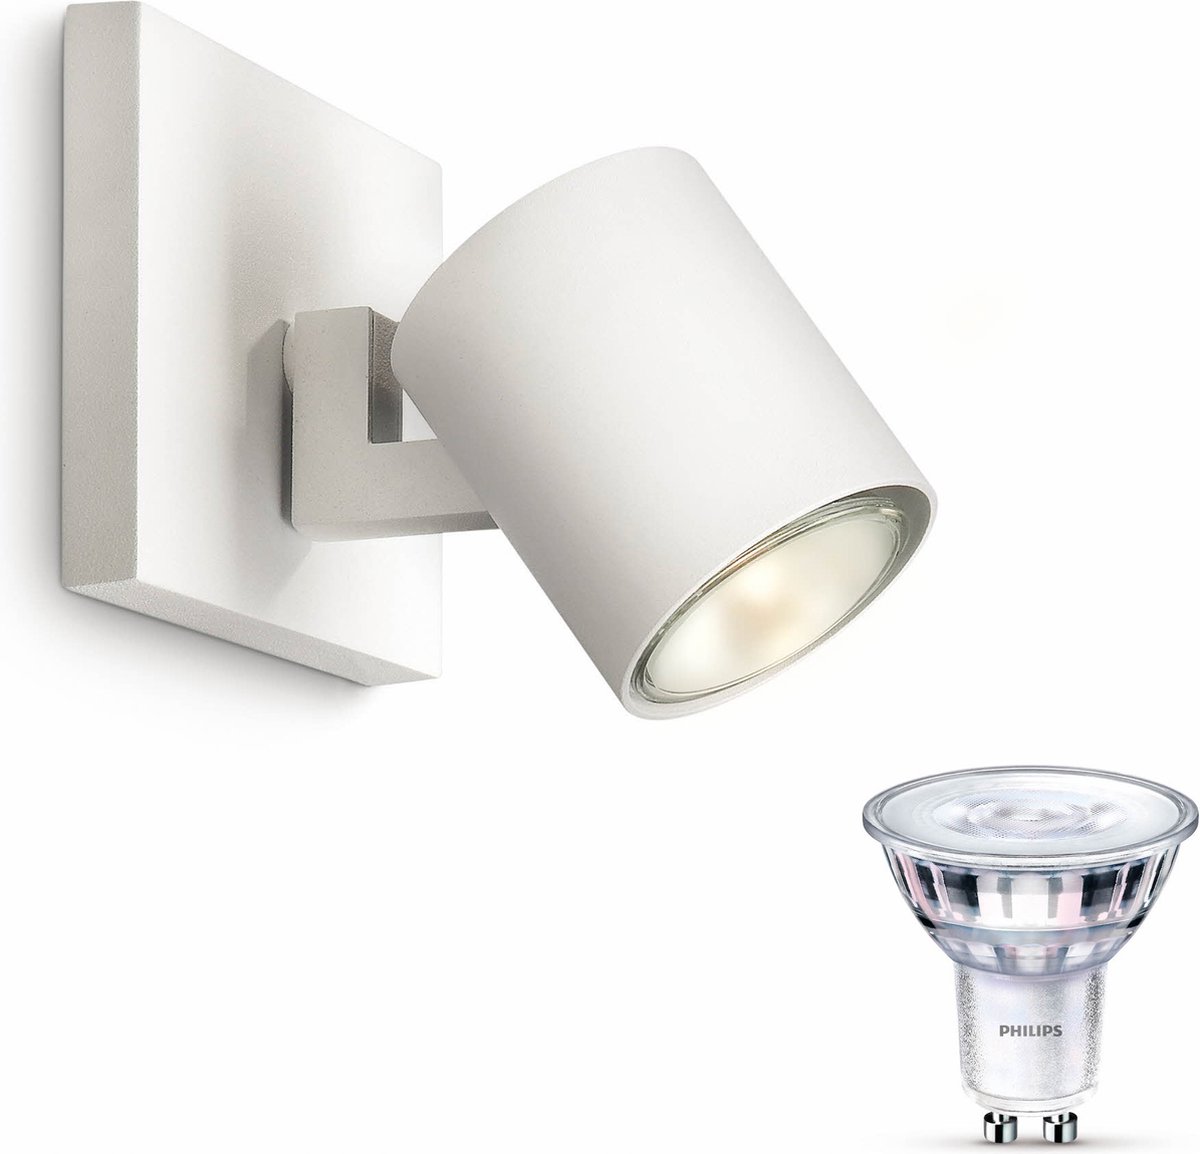 Philips myLiving Runner Opbouwspot - LED - Wit - 1 lichtpunt - Incl. Philips LED Scene Switch Gu10 50W